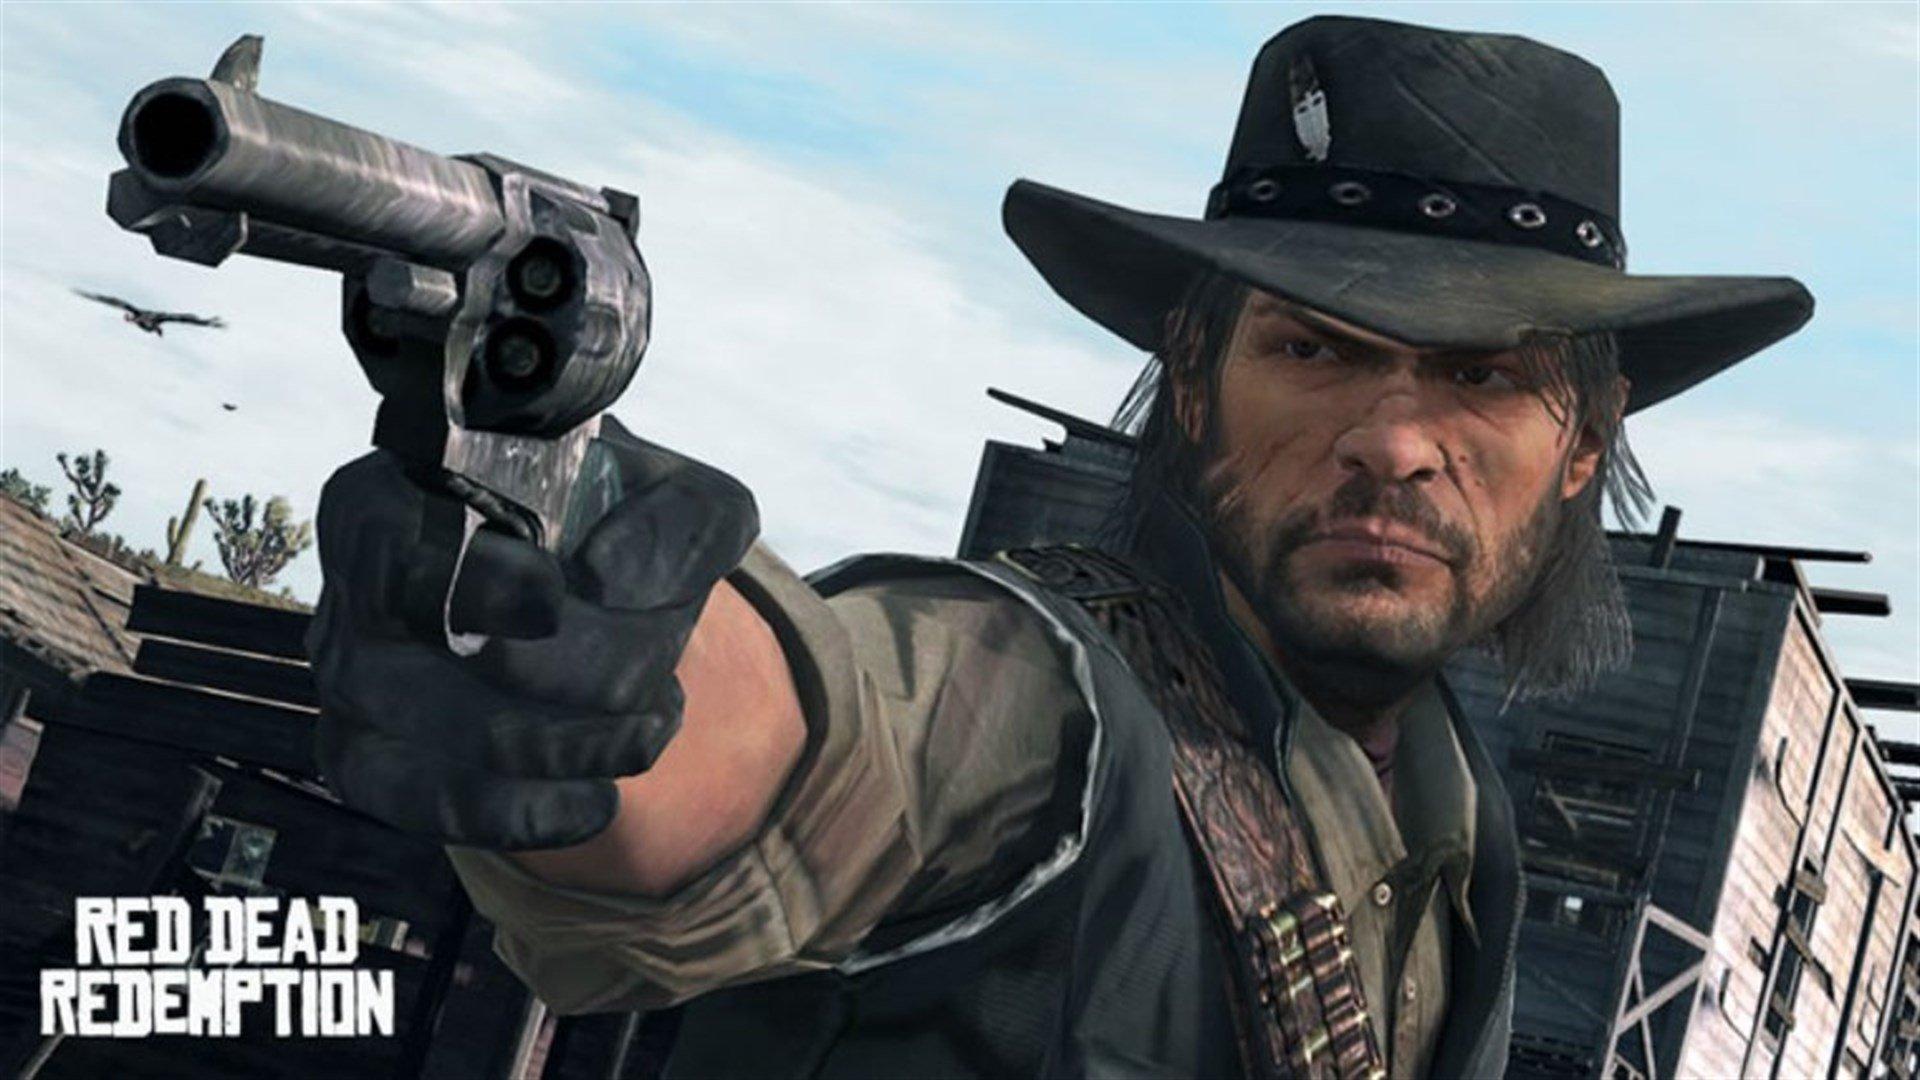 Red Dead Redemption - Playstation 3